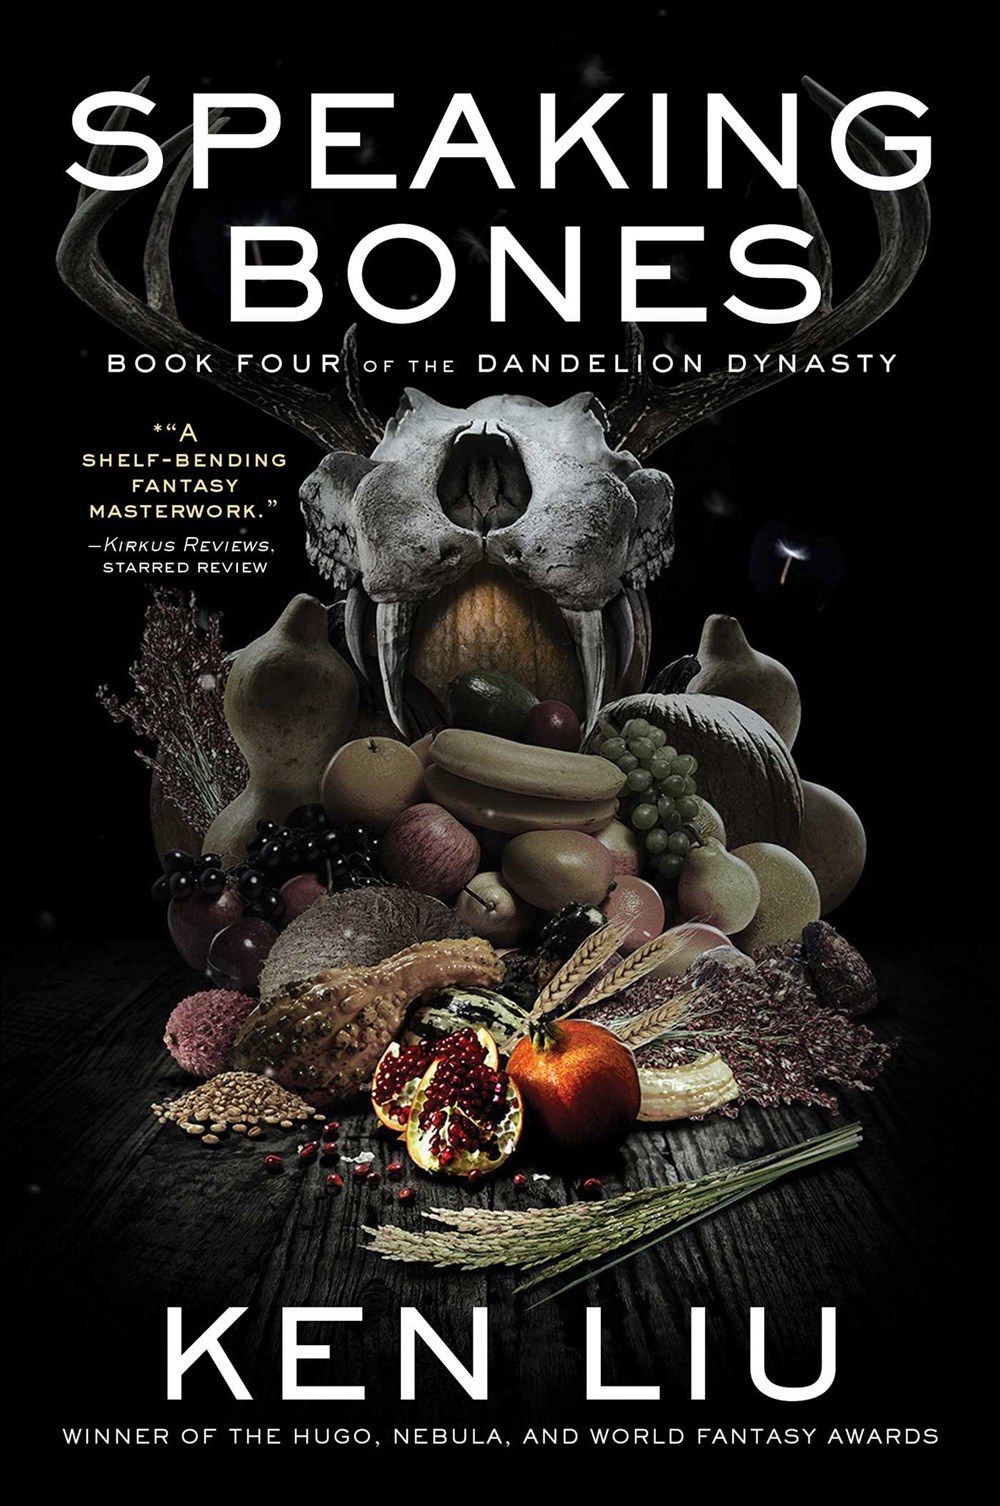 The cover of Speaking Bones by Ken Liu, featuring a cornucopia in front of a garinafin skull.